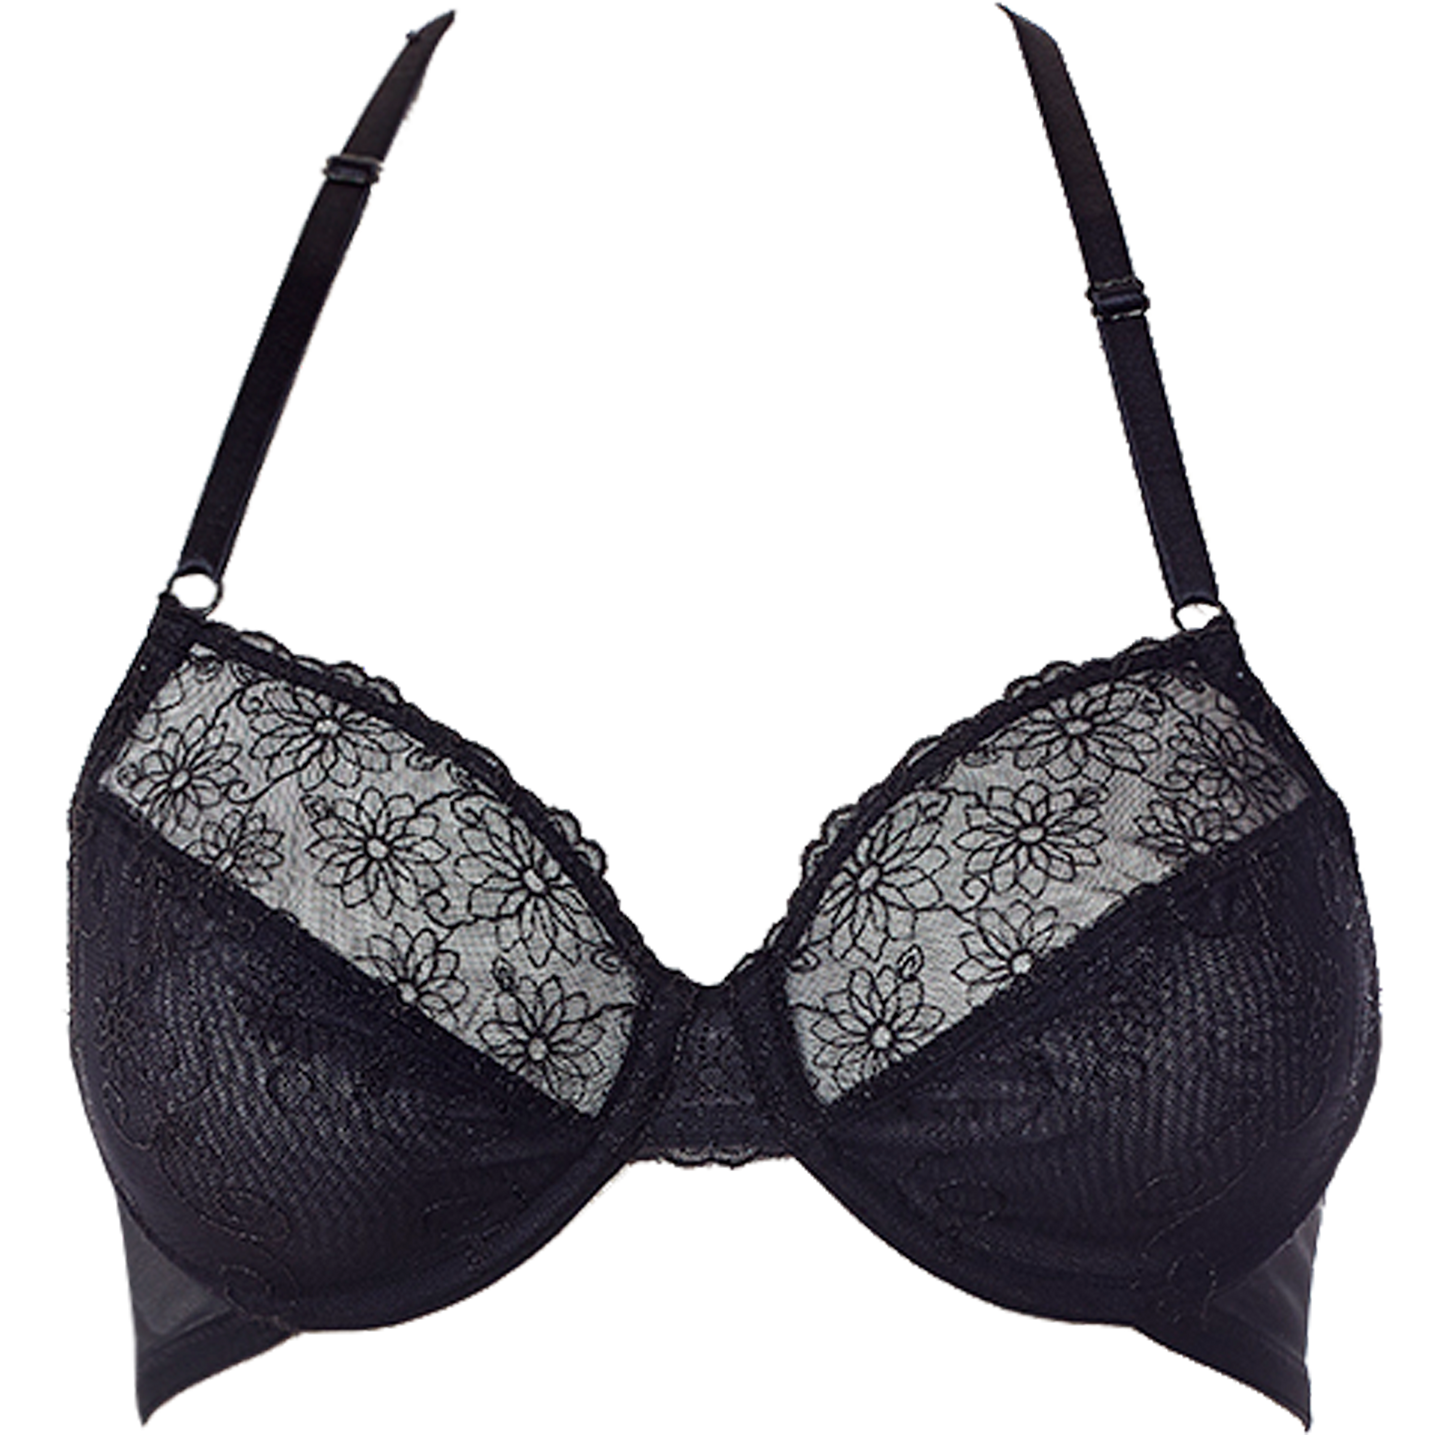 Glamour embroidered mesh triangle bra